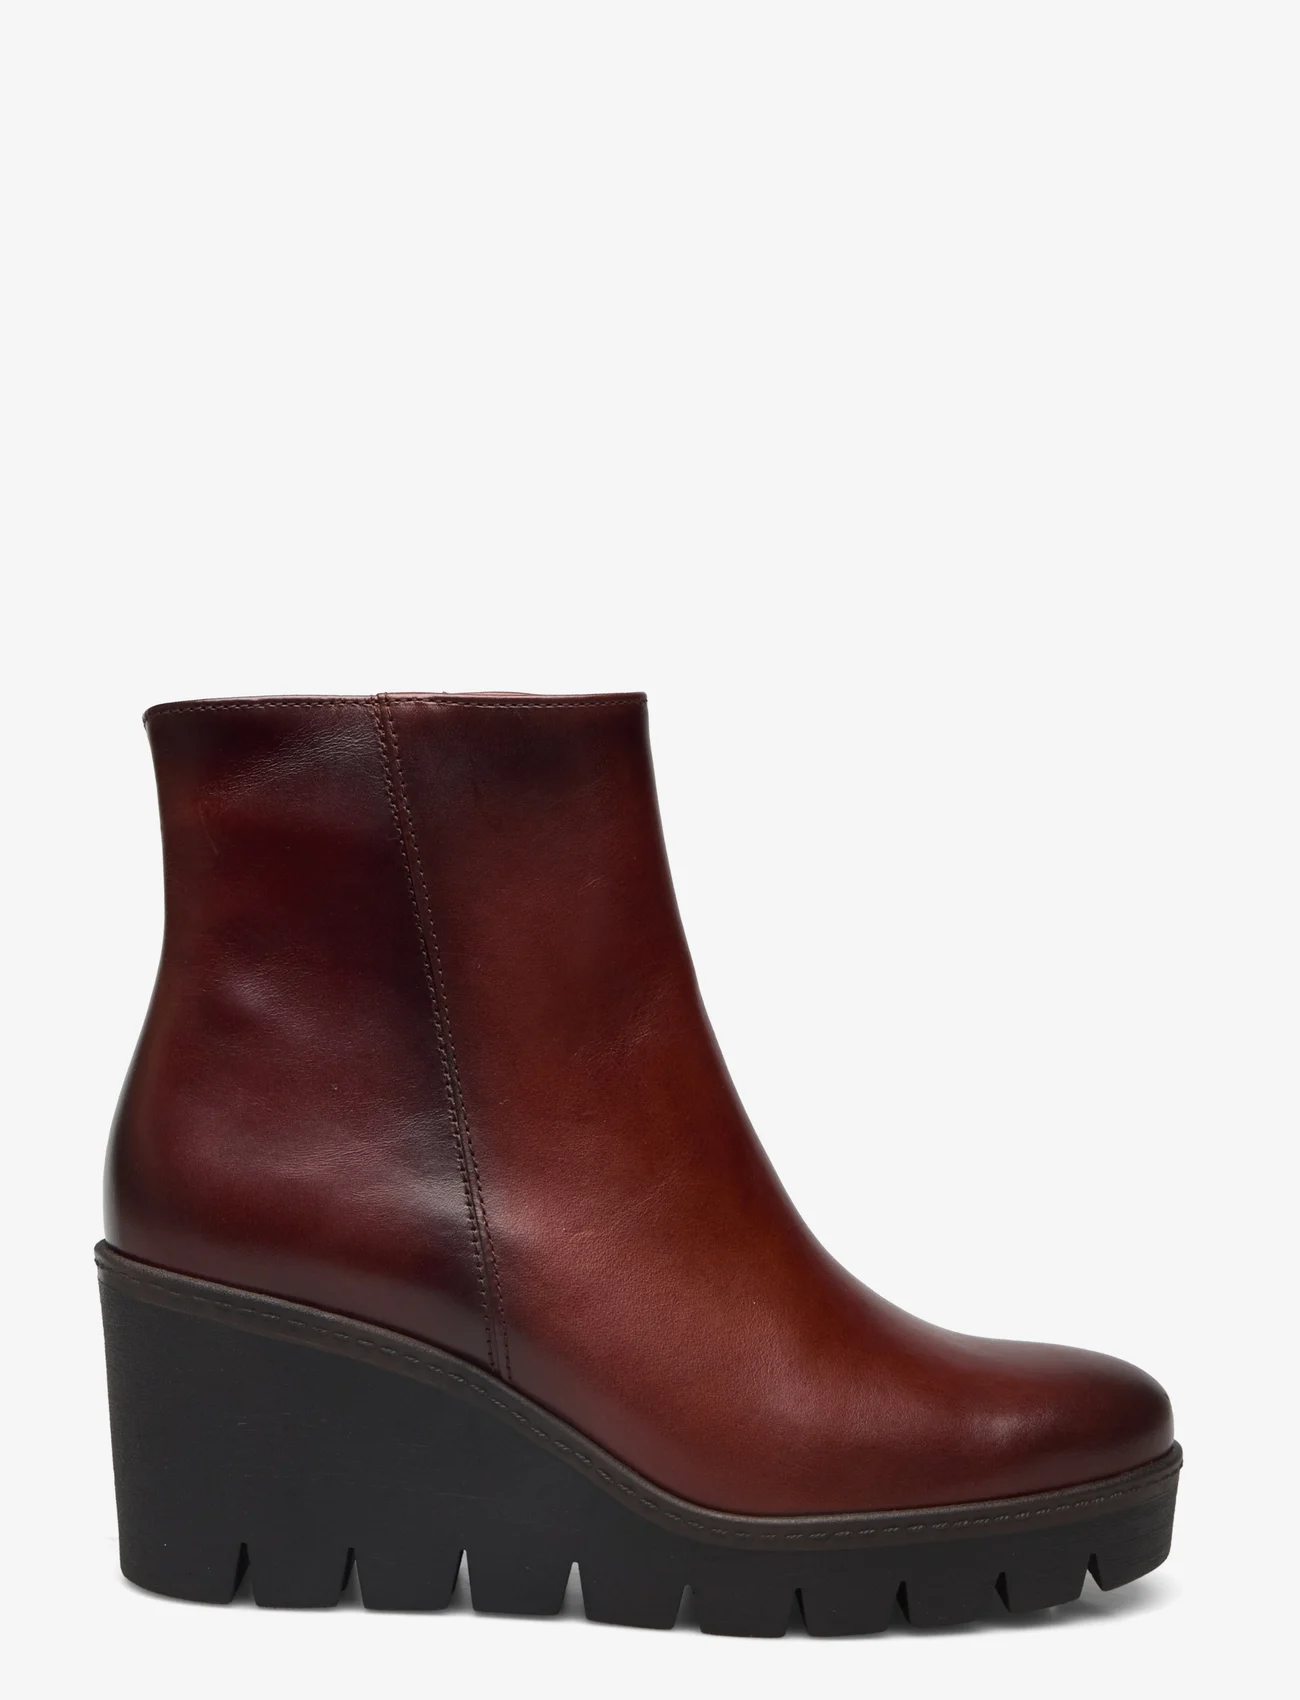 Gabor - Wedge ankle boot - hohe absätze - brown - 1